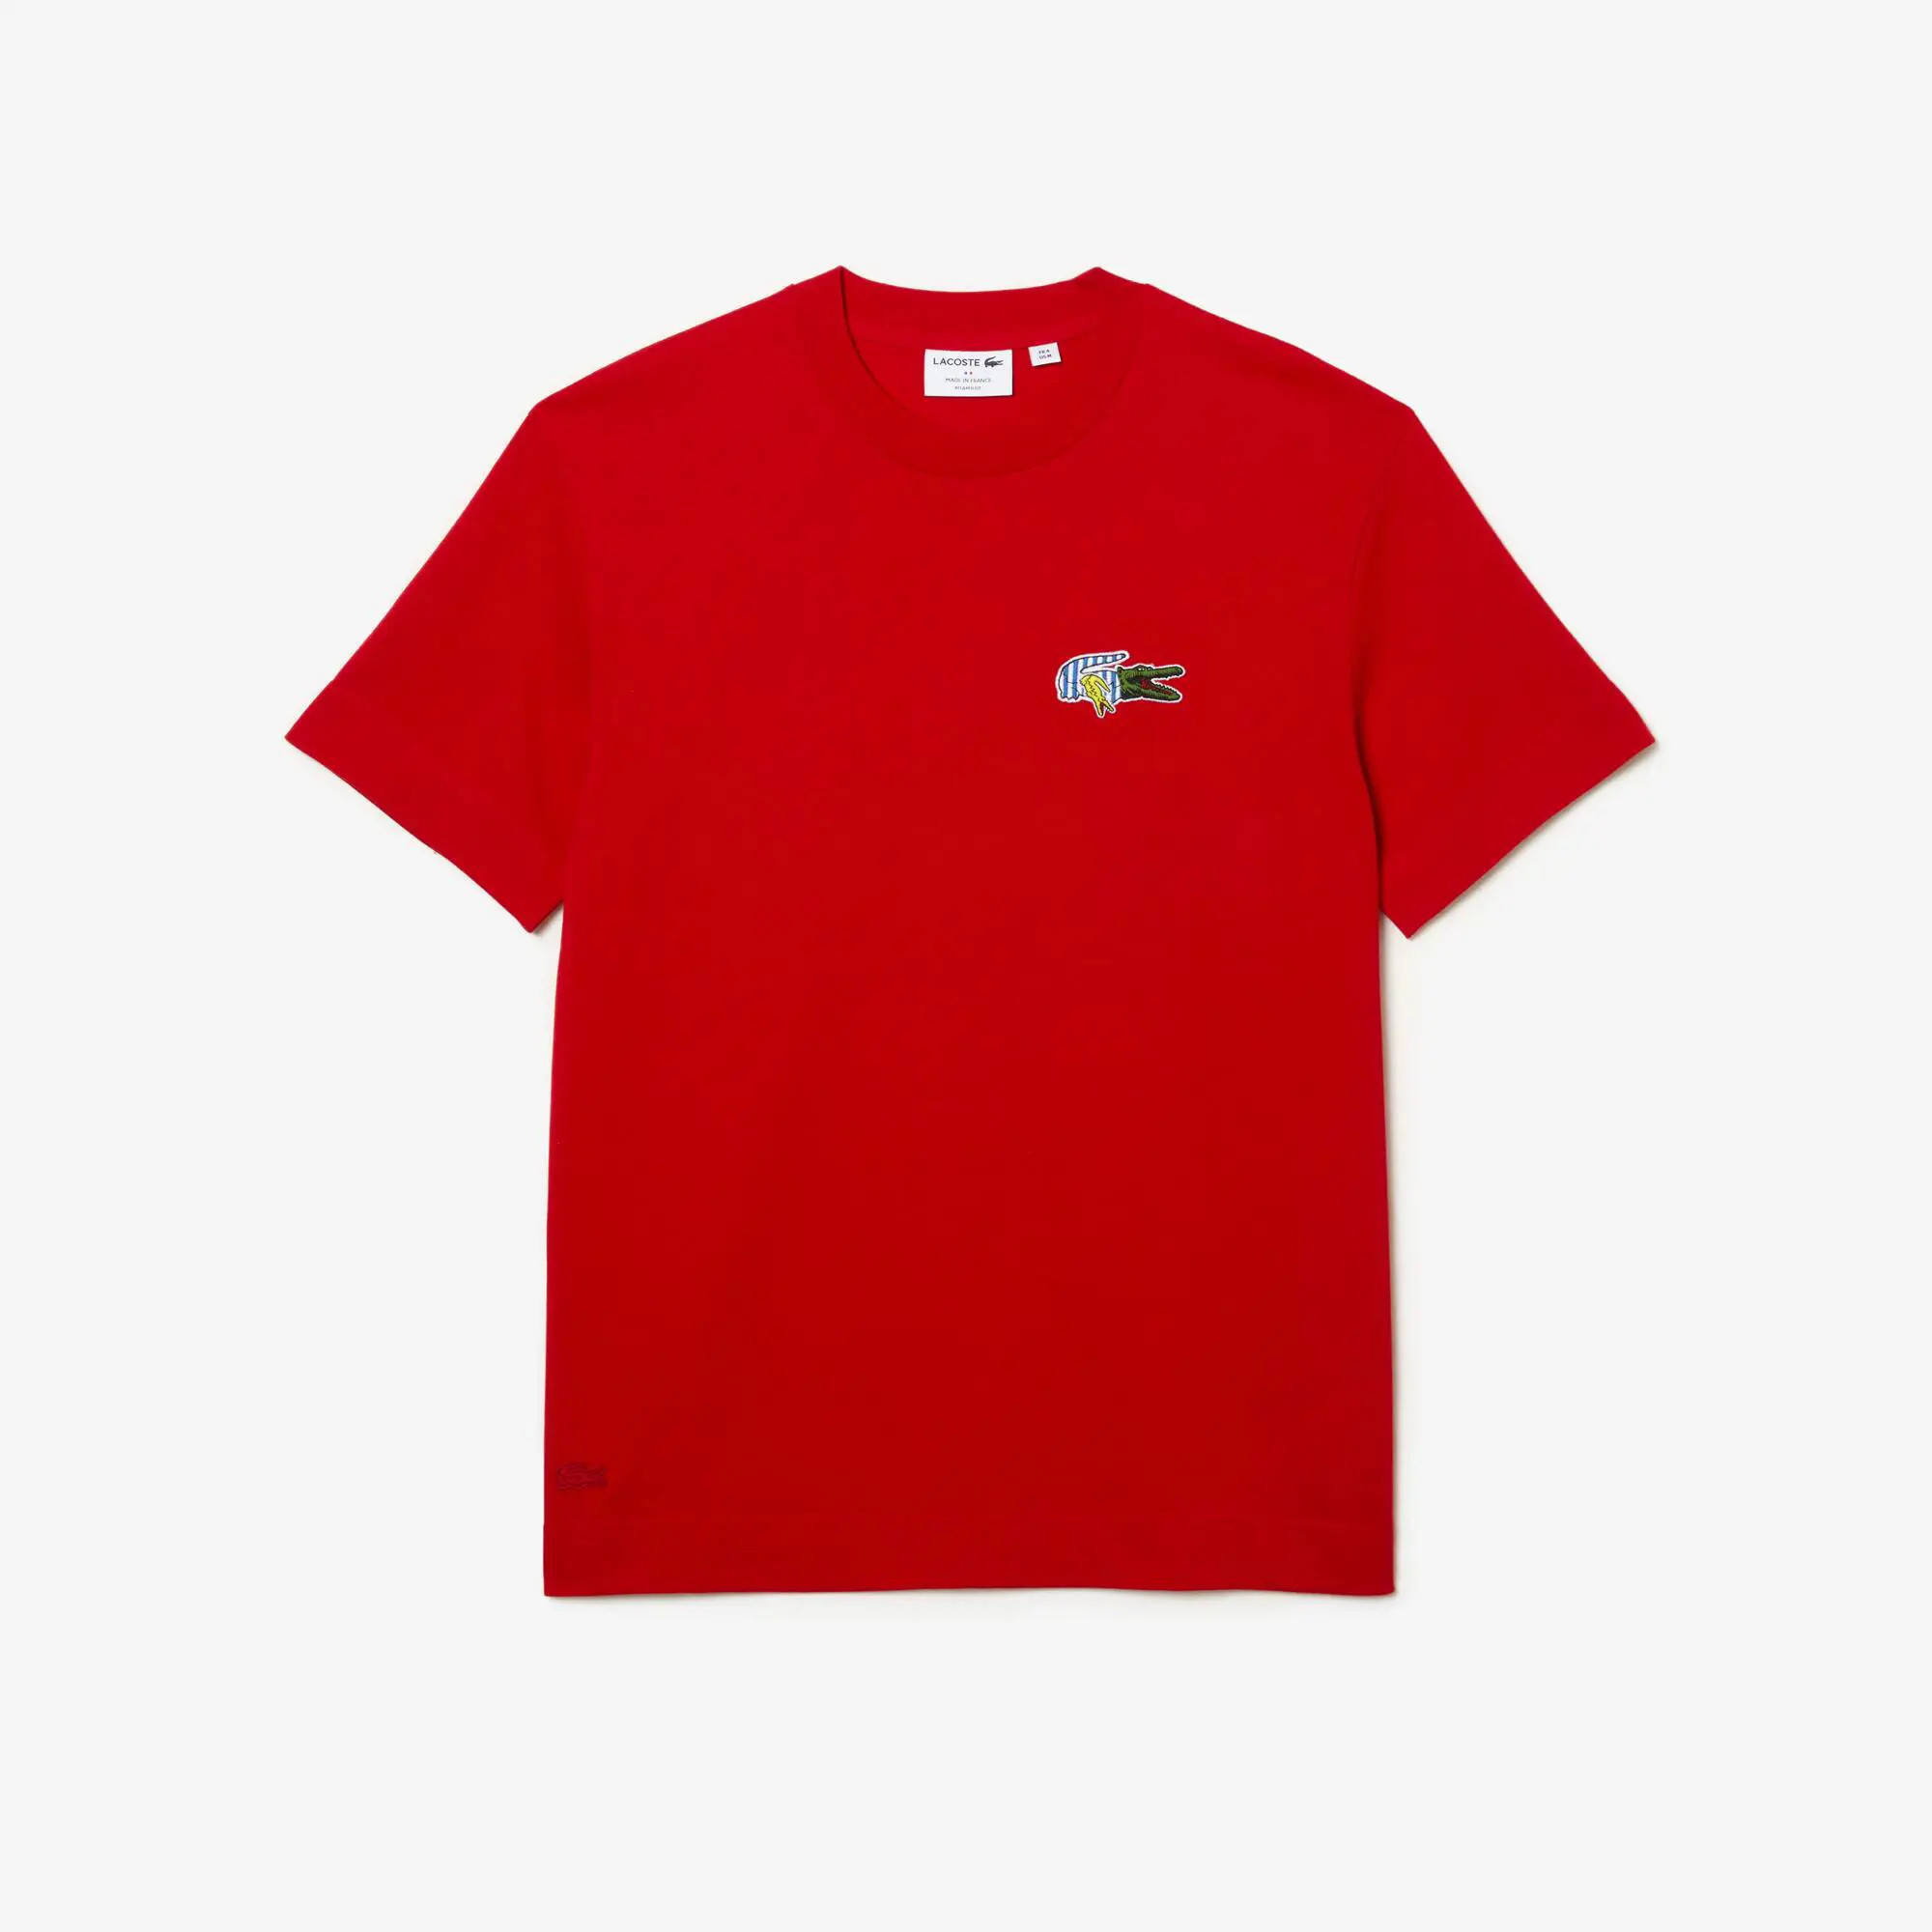 Lacoste Men's Relaxed Fit Comic Effect Badge T-Shirt. 2